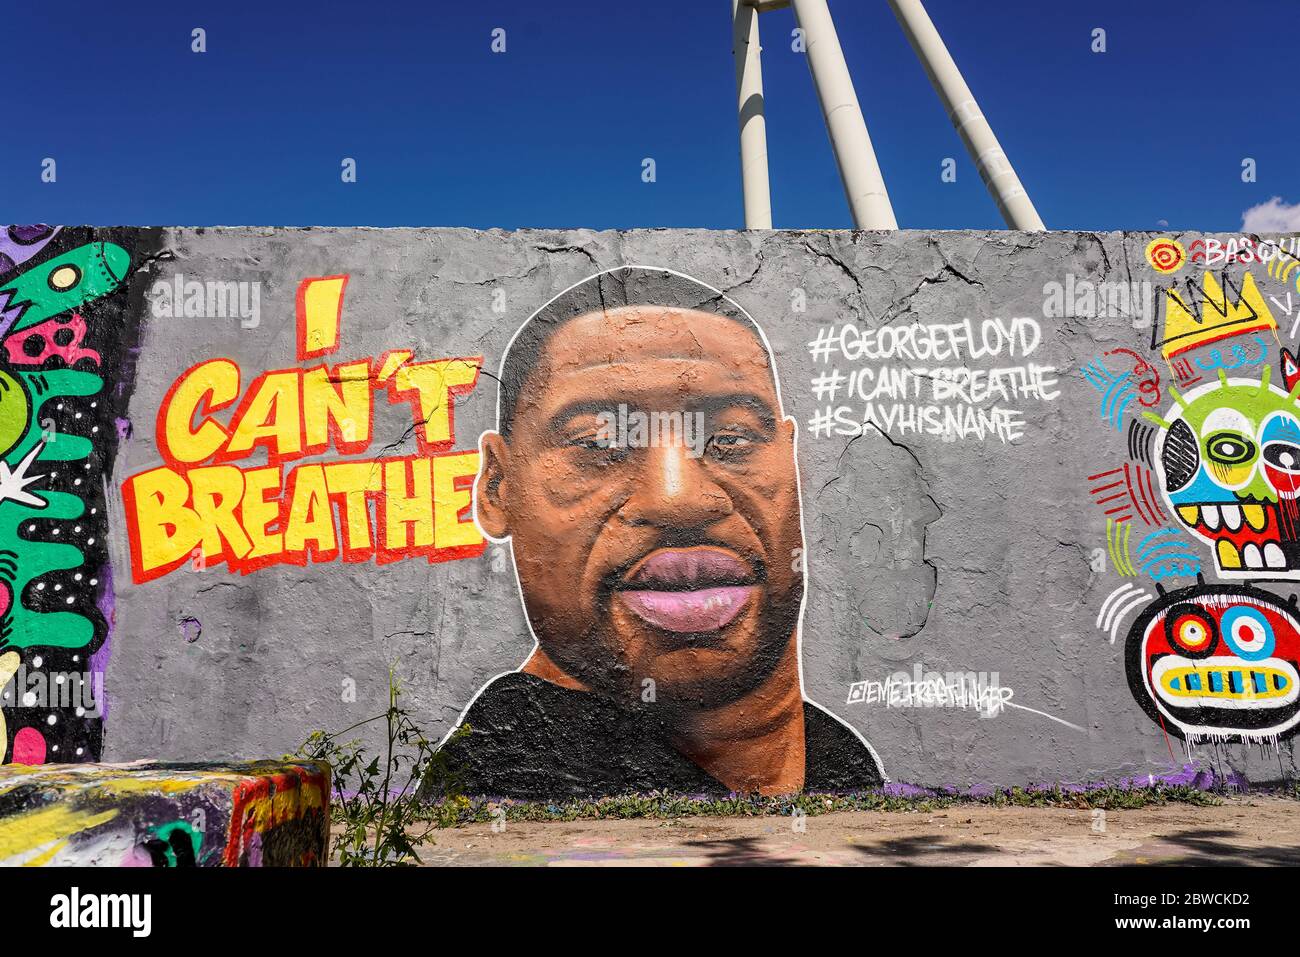 May 30th, 2020, Berlin, a new graffiti by EME Freethinker on a wall in Mauerpark in Berlin, Prenzlauer Berg, showing the dead black George Floyd from Minneapolis/USA with his quote 'I can t breathe'. | usage worldwide Stock Photo